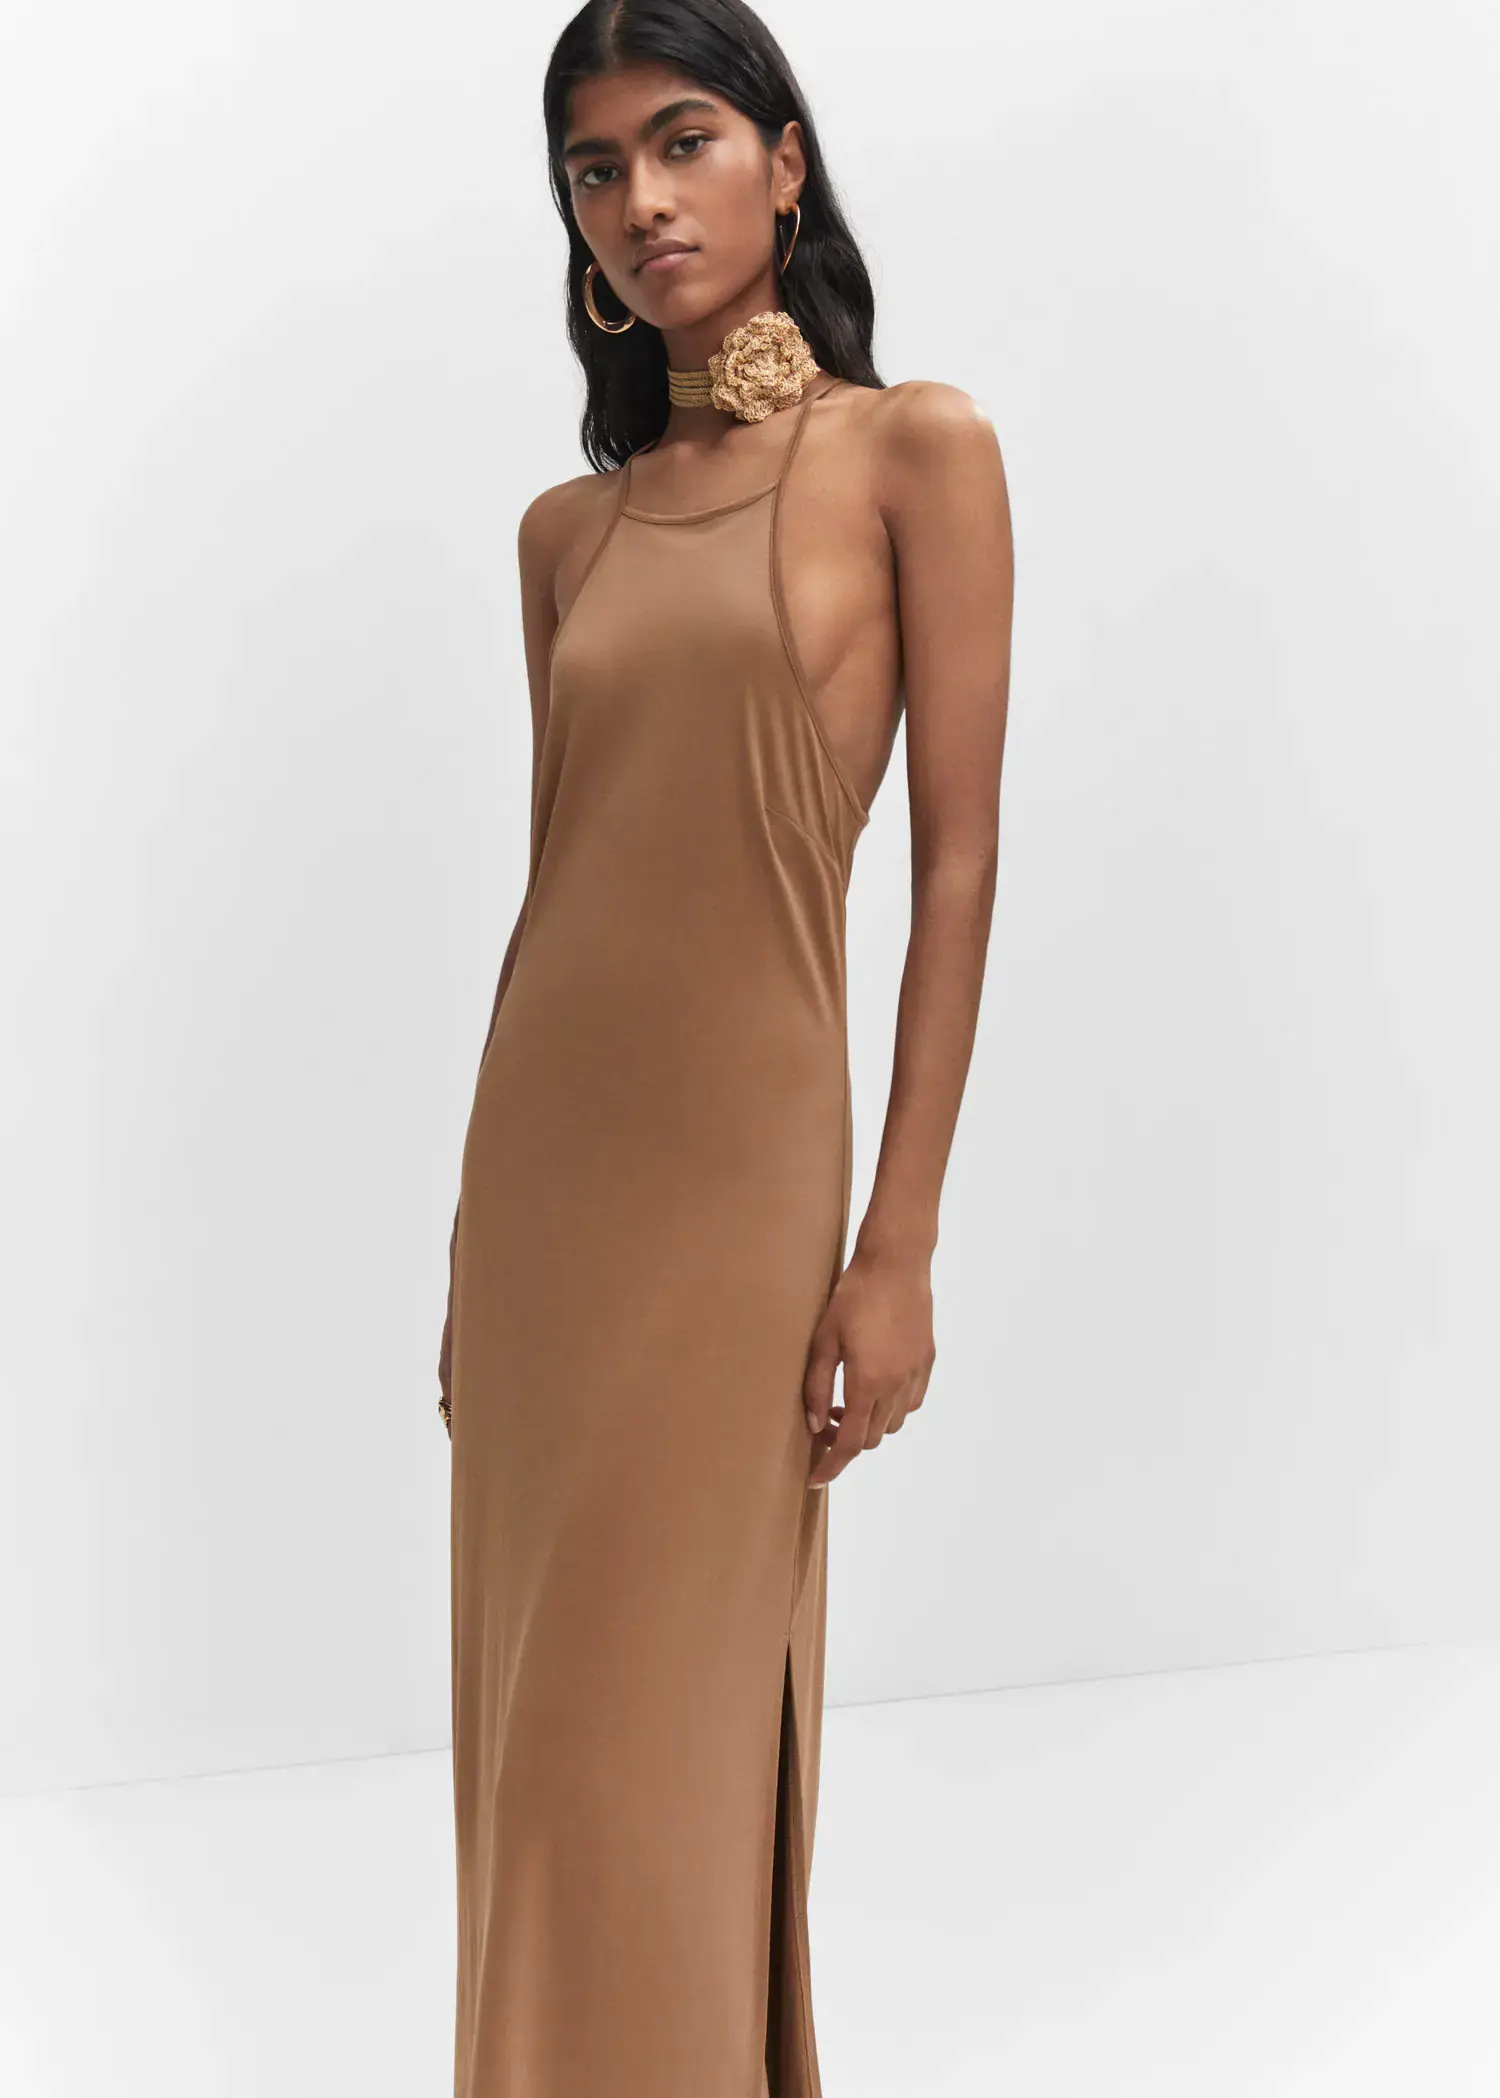 Mango Halter-neck modal dress. a woman in a tan dress standing in front of a white wall. 